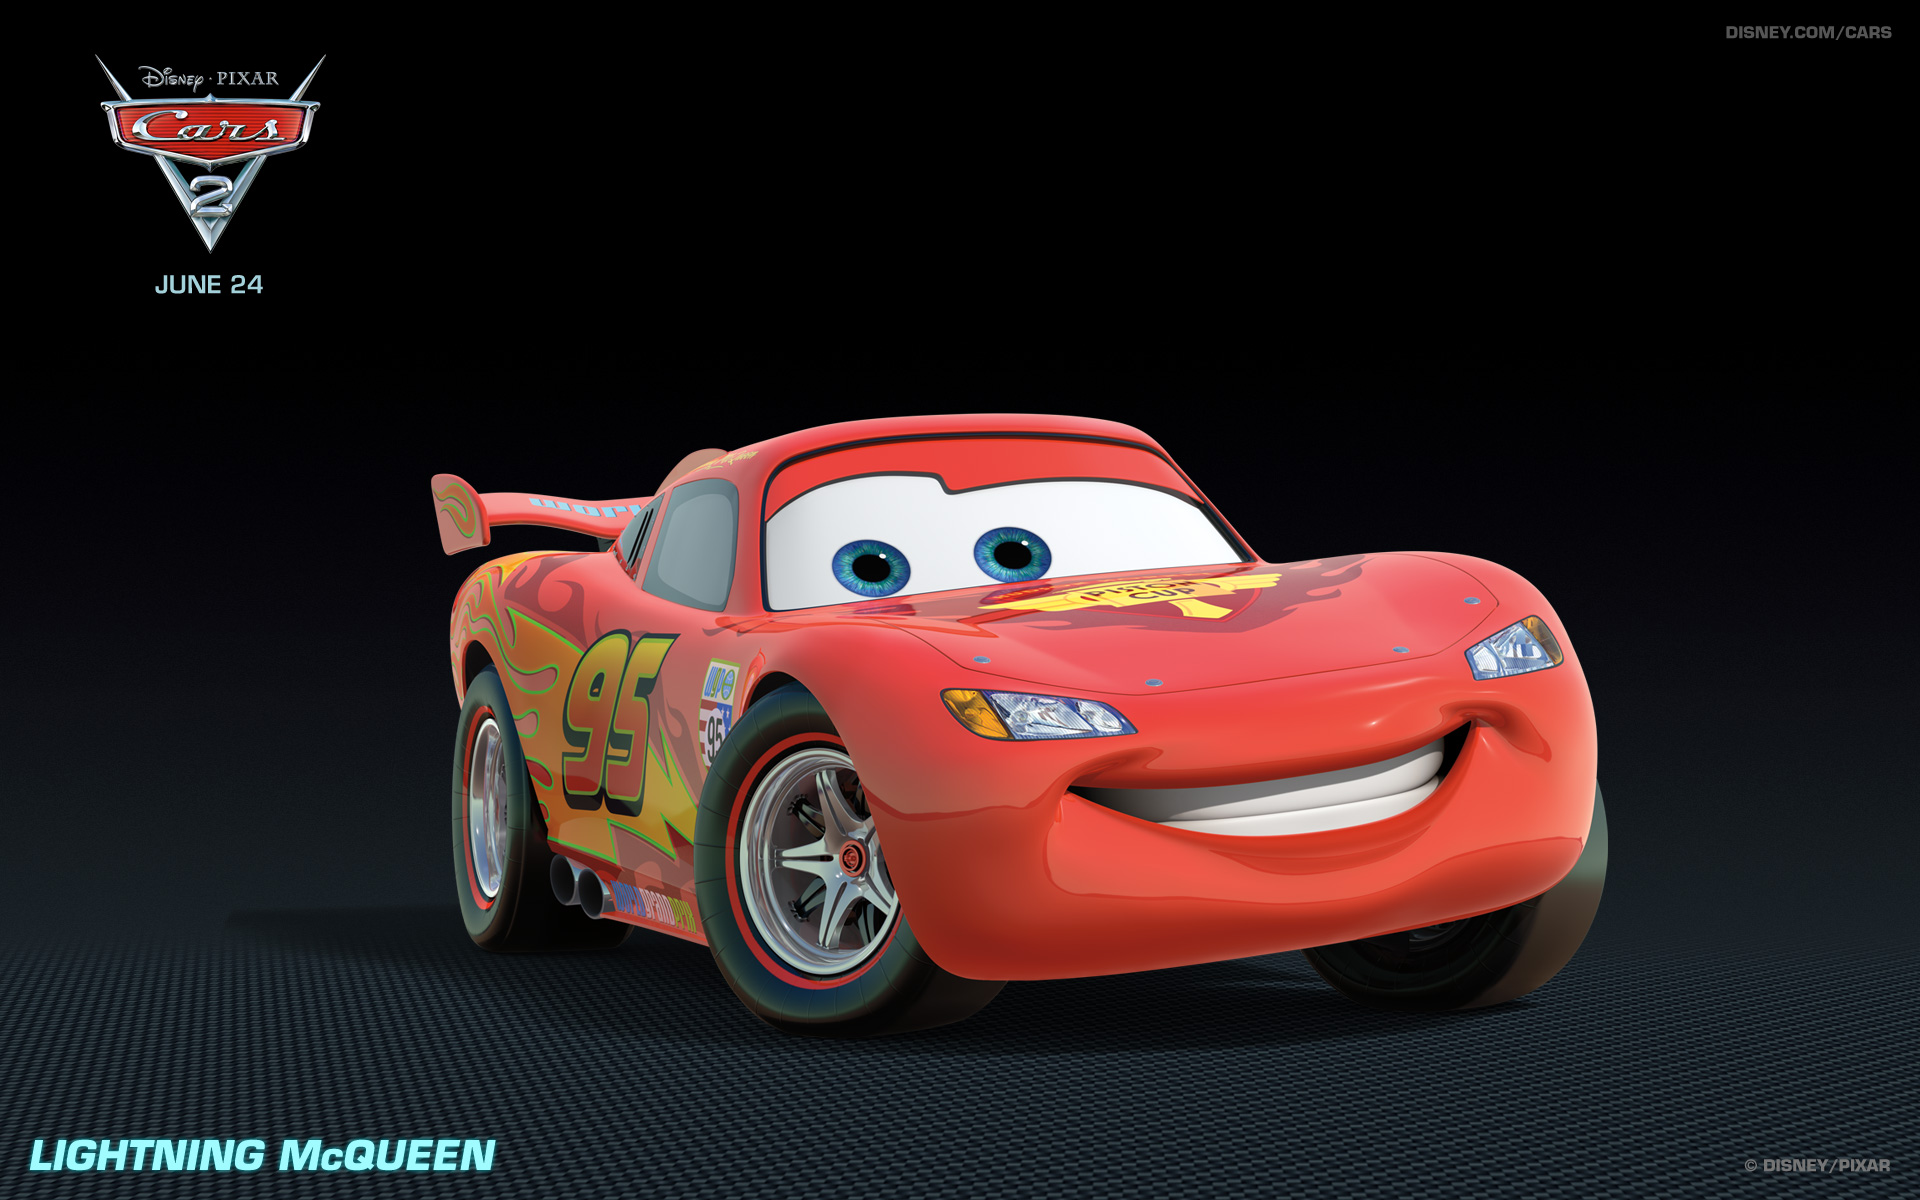  McQueen the race car from Disneys Cars 2 CG animated movie wallpaper